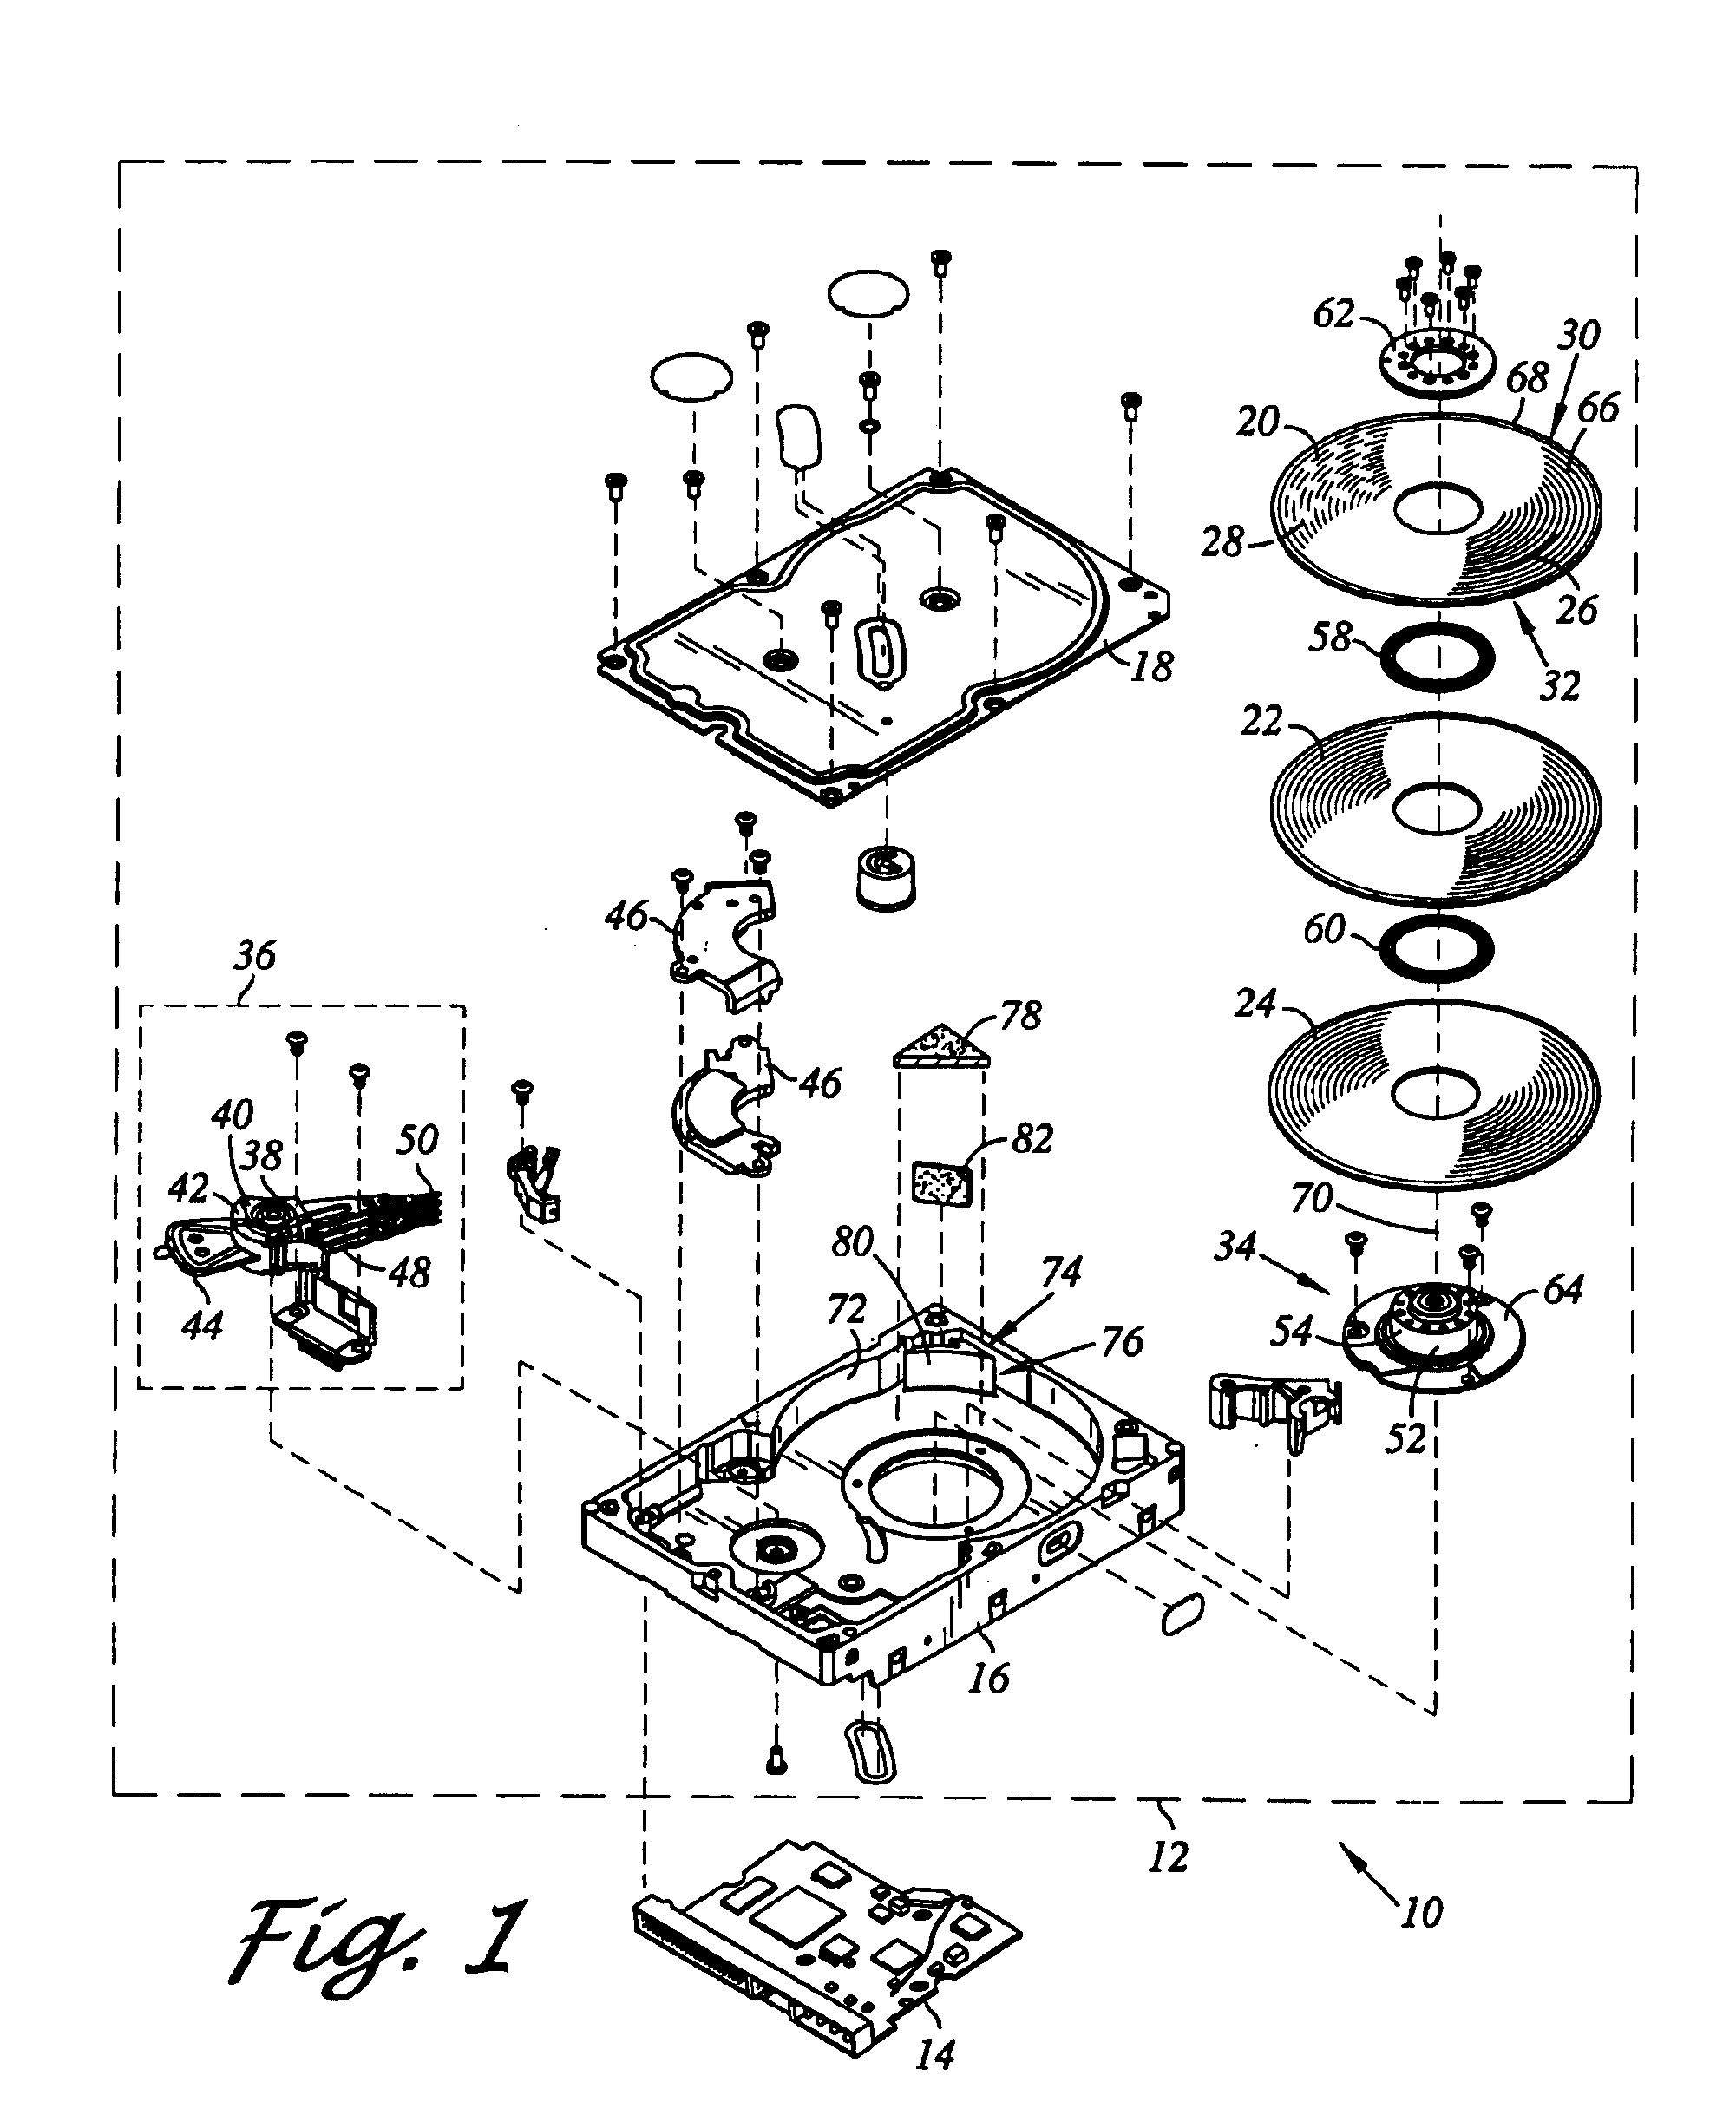 Disk drive including an airflow diverter element radially between spindle motor axis of rotation and cavity in shroud surface